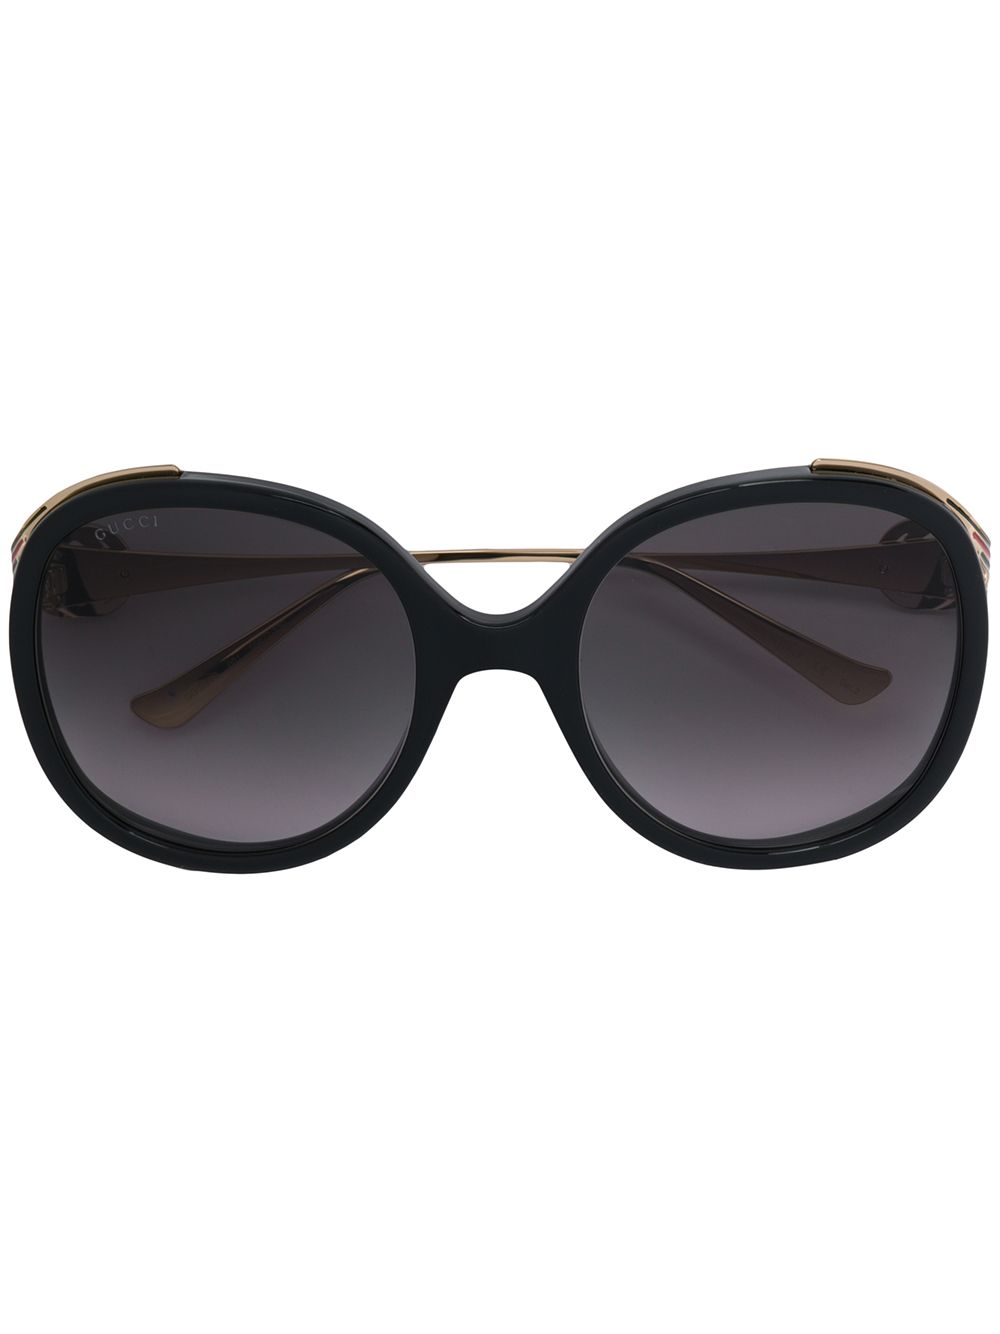 GUCCI ROUND FRAME OVERSIZED SUNGLASSES,GG0226S12499013